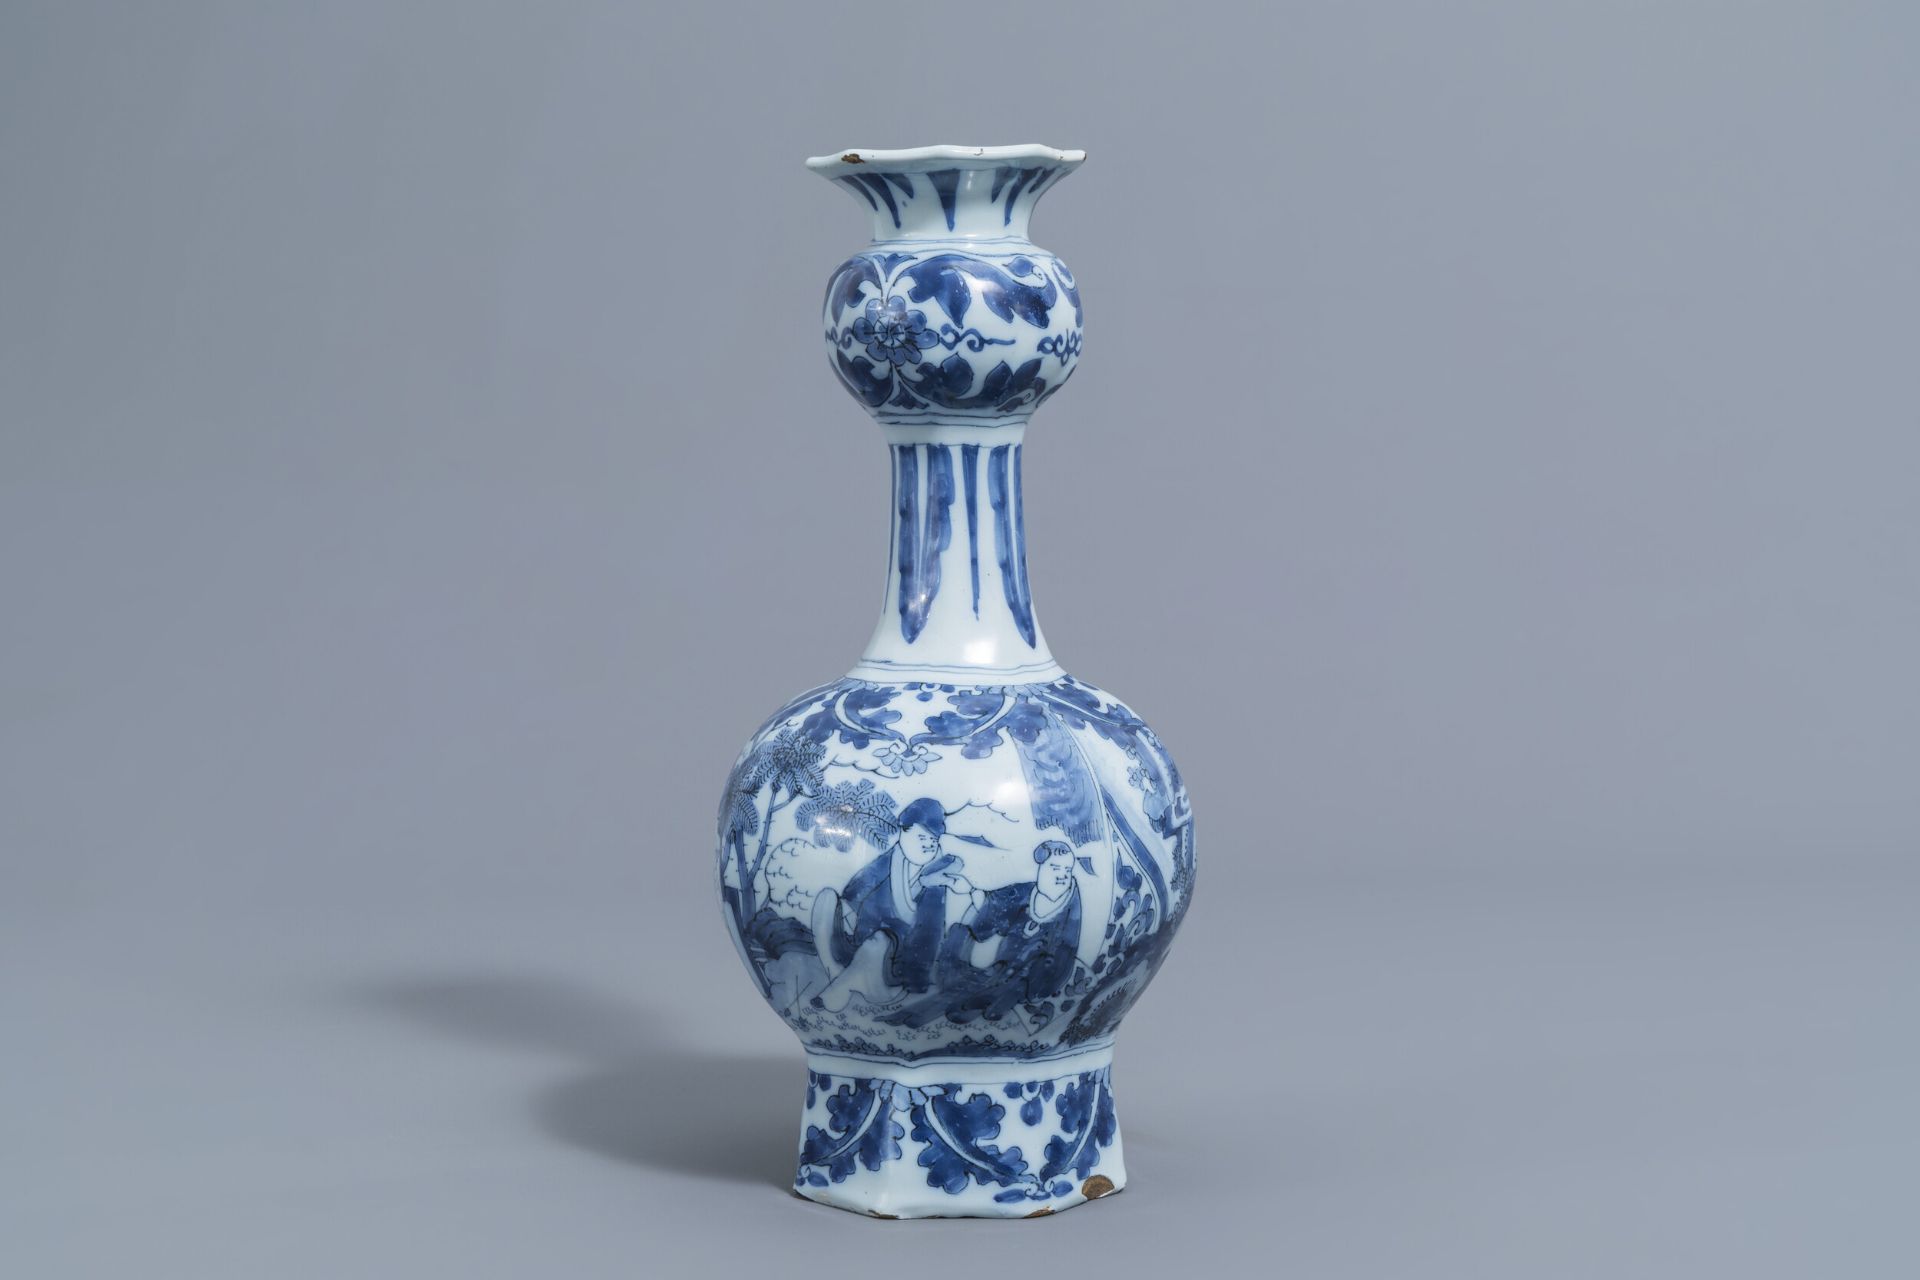 A Dutch Delft blue and white 'chinoiserie' garlic neck bottle vase, late 17th C.